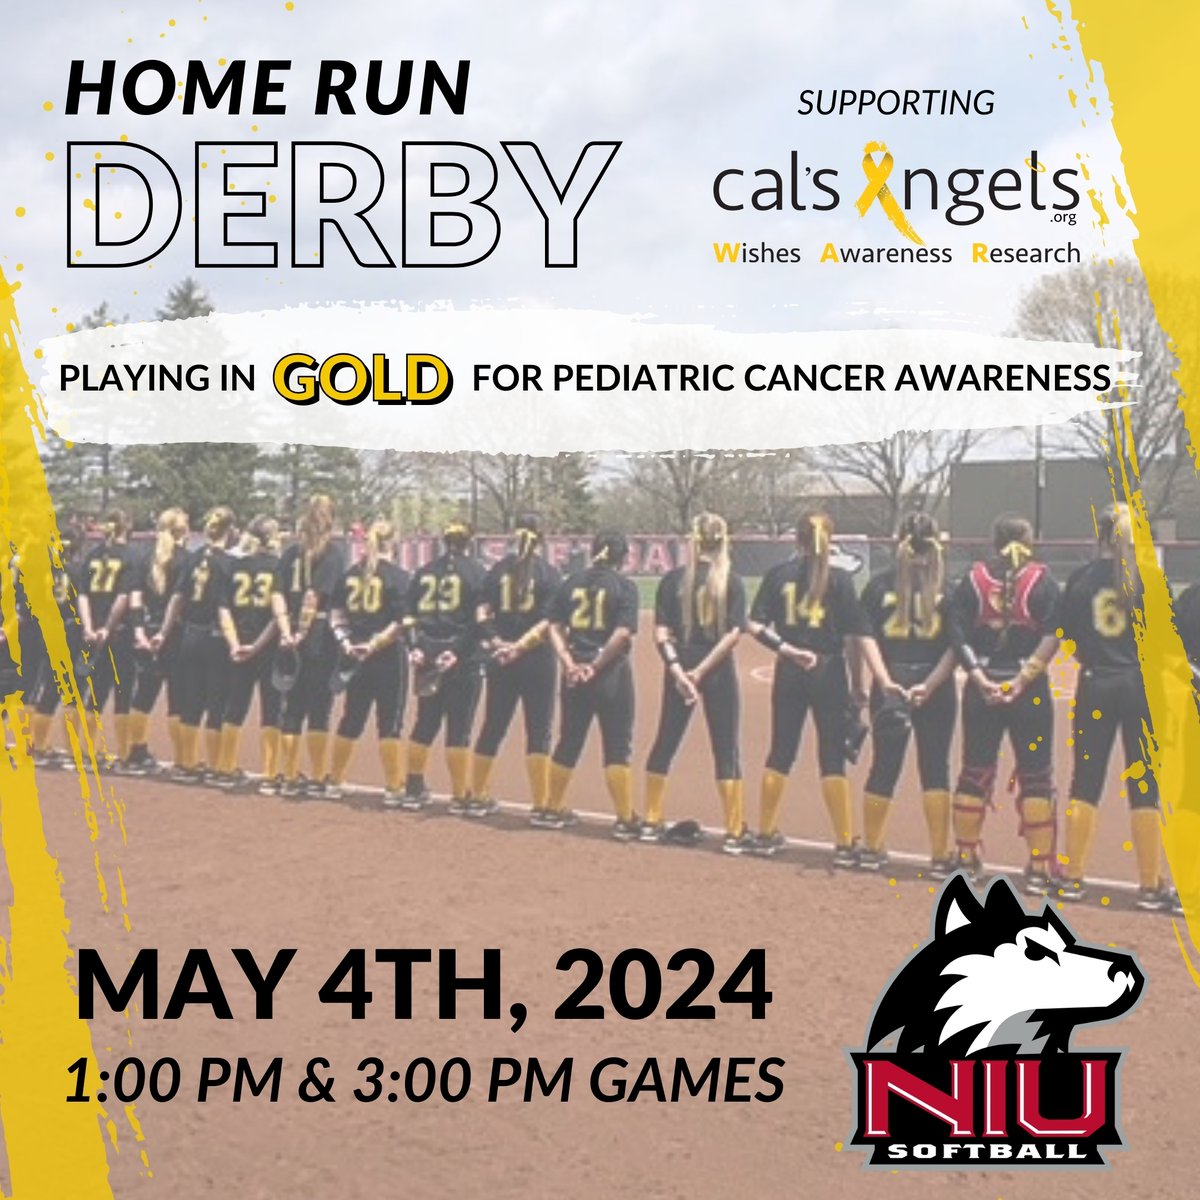 Knock pediatric cancer out of the park with NIU at their annual Home Run Derby! 🥎 Join us for a day at the fields on May 4th as the @niusoftball team goes to bat for kids fighting cancer. Gold-Out Games will be held at 1:00 and 3:00 PM, and Cal’s Angels warriors will be honored.